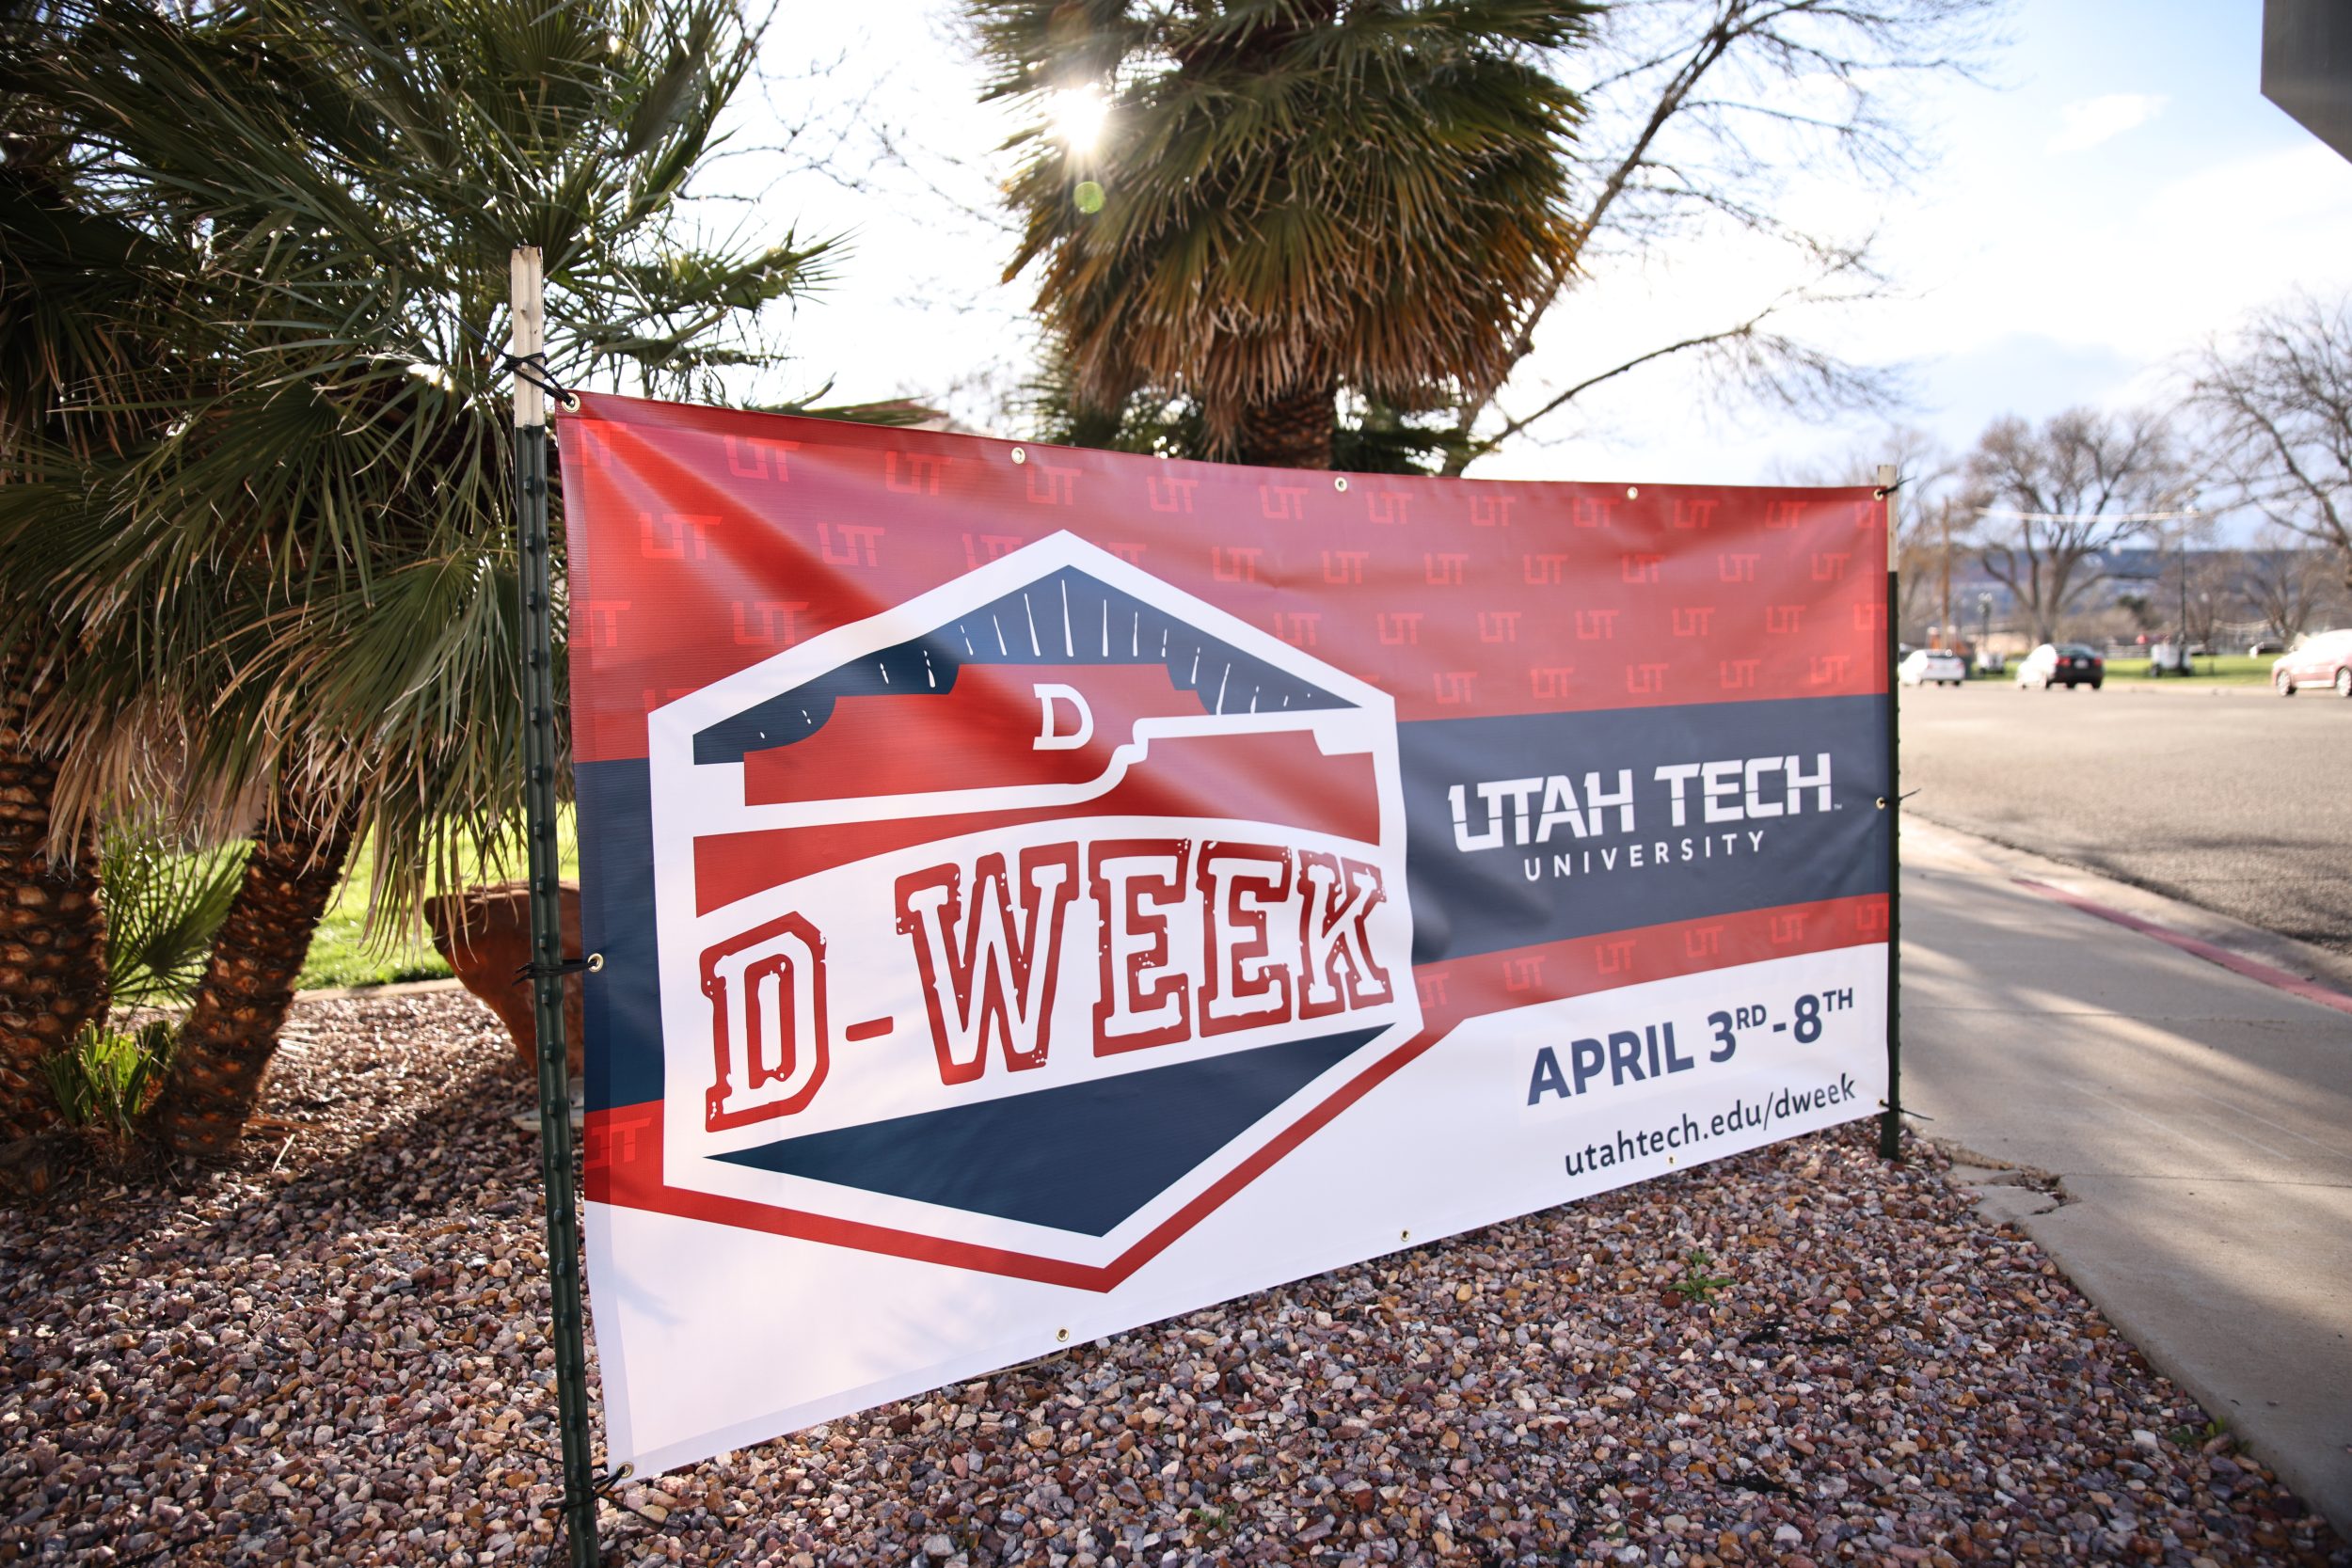 Utah Tech’s first D-Week will have the same traditions as previous years